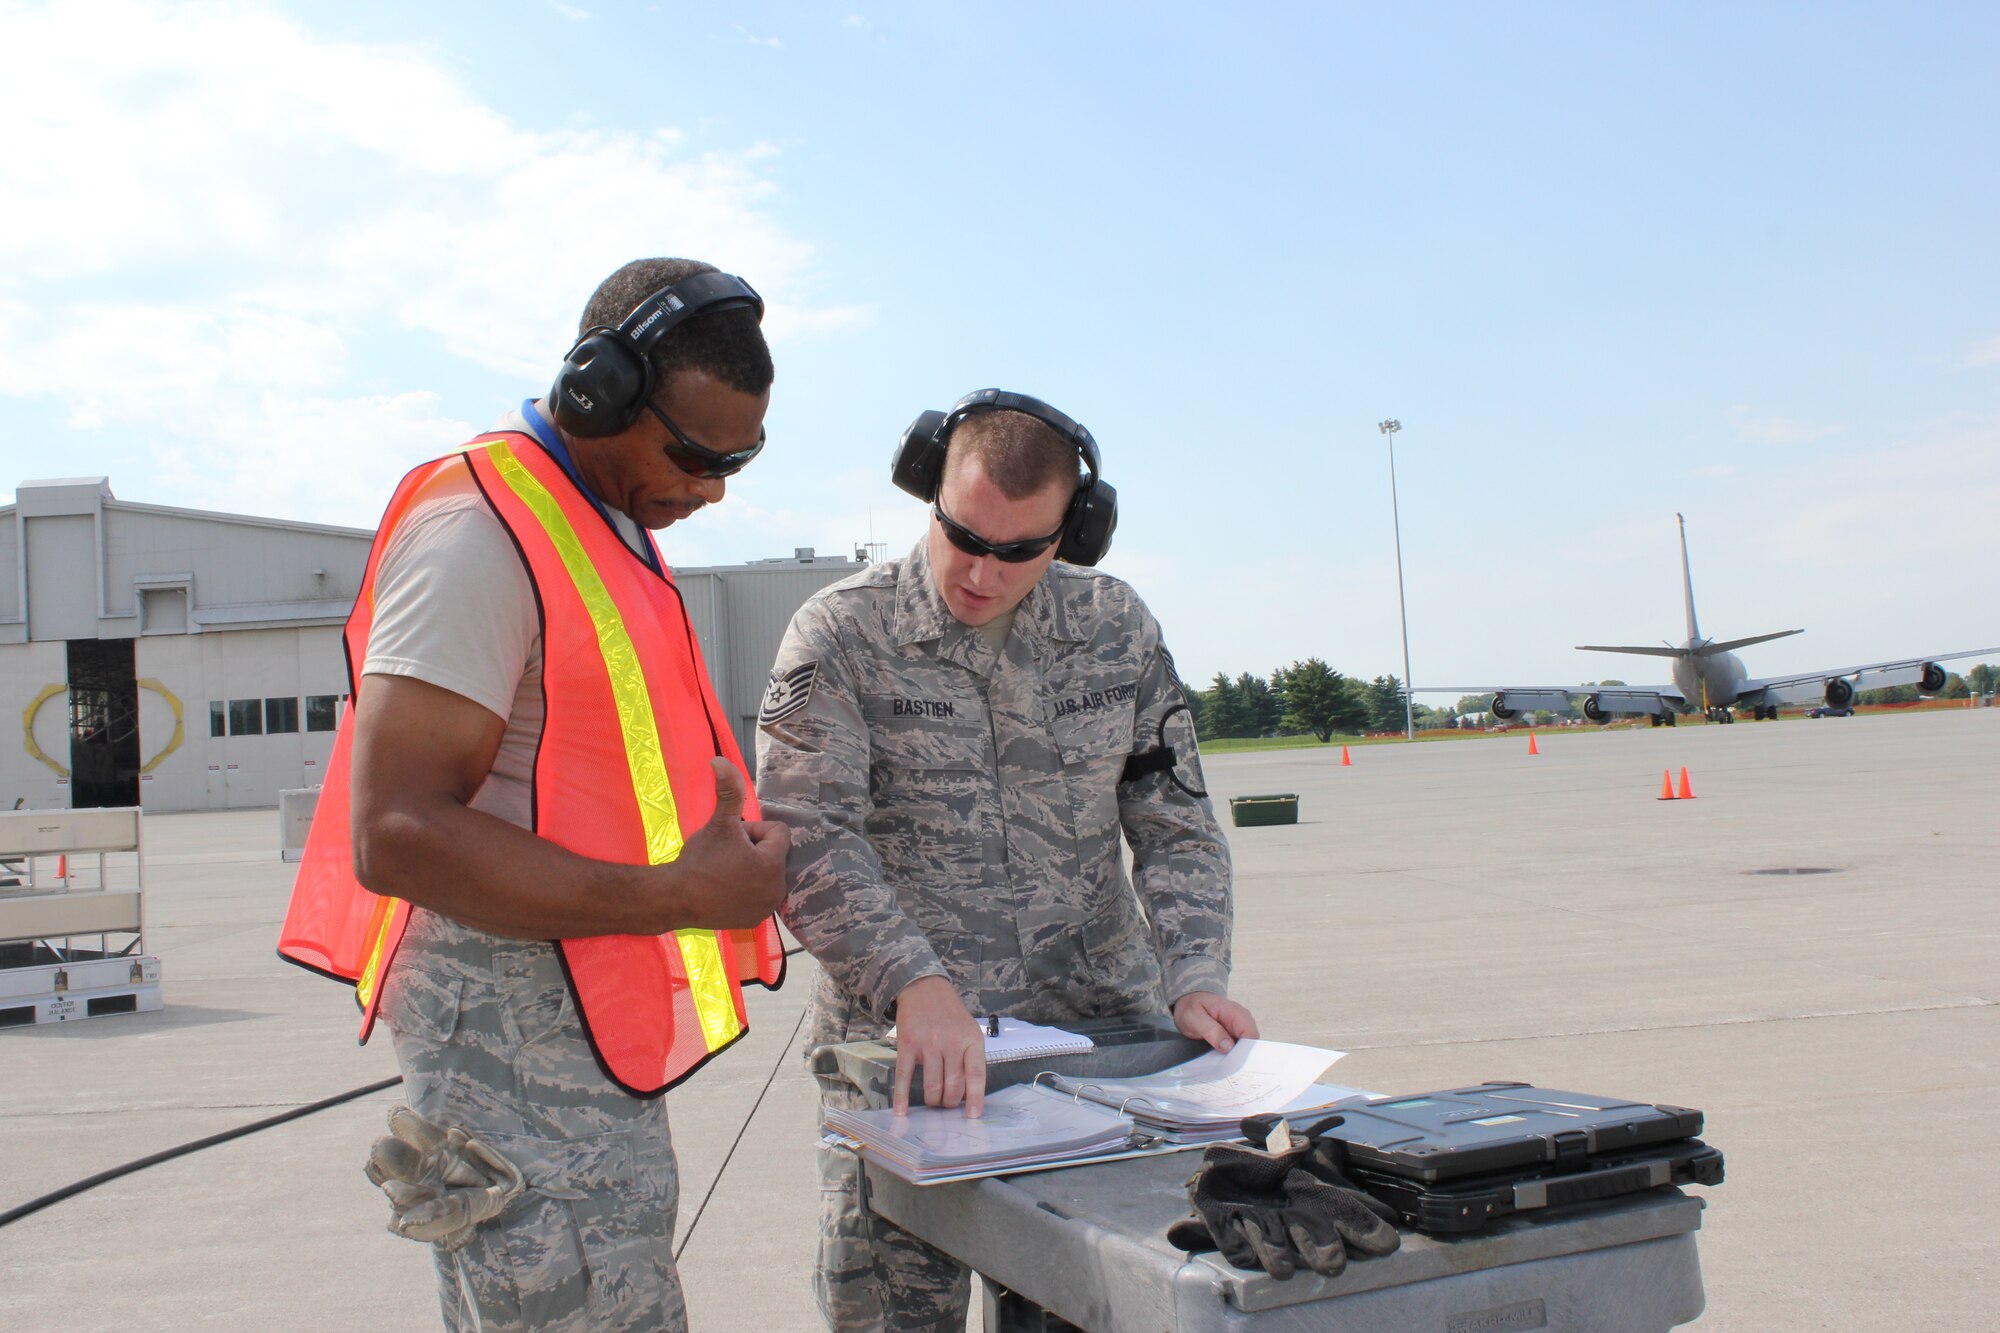 TSgt. Louis Jones and TSgt. Richard Bastien, 191st Maintenance Squadron, examine a technical order during a training exercise at Selfridge Air National Guard Base, Mich., Aug. 13, 2011. The 191st MXS performed an exercise in which they simulated a KC-135 Stratotanker had damaged nose gear and a crane was needed to move the aircraft to a safe location for repair. All aircraft maintenance operations are detailed in technical orders, which are used by Airmen to ensure that aircraft are properly prepared for flight. (USAF photo by TSgt. Dan Heaton)